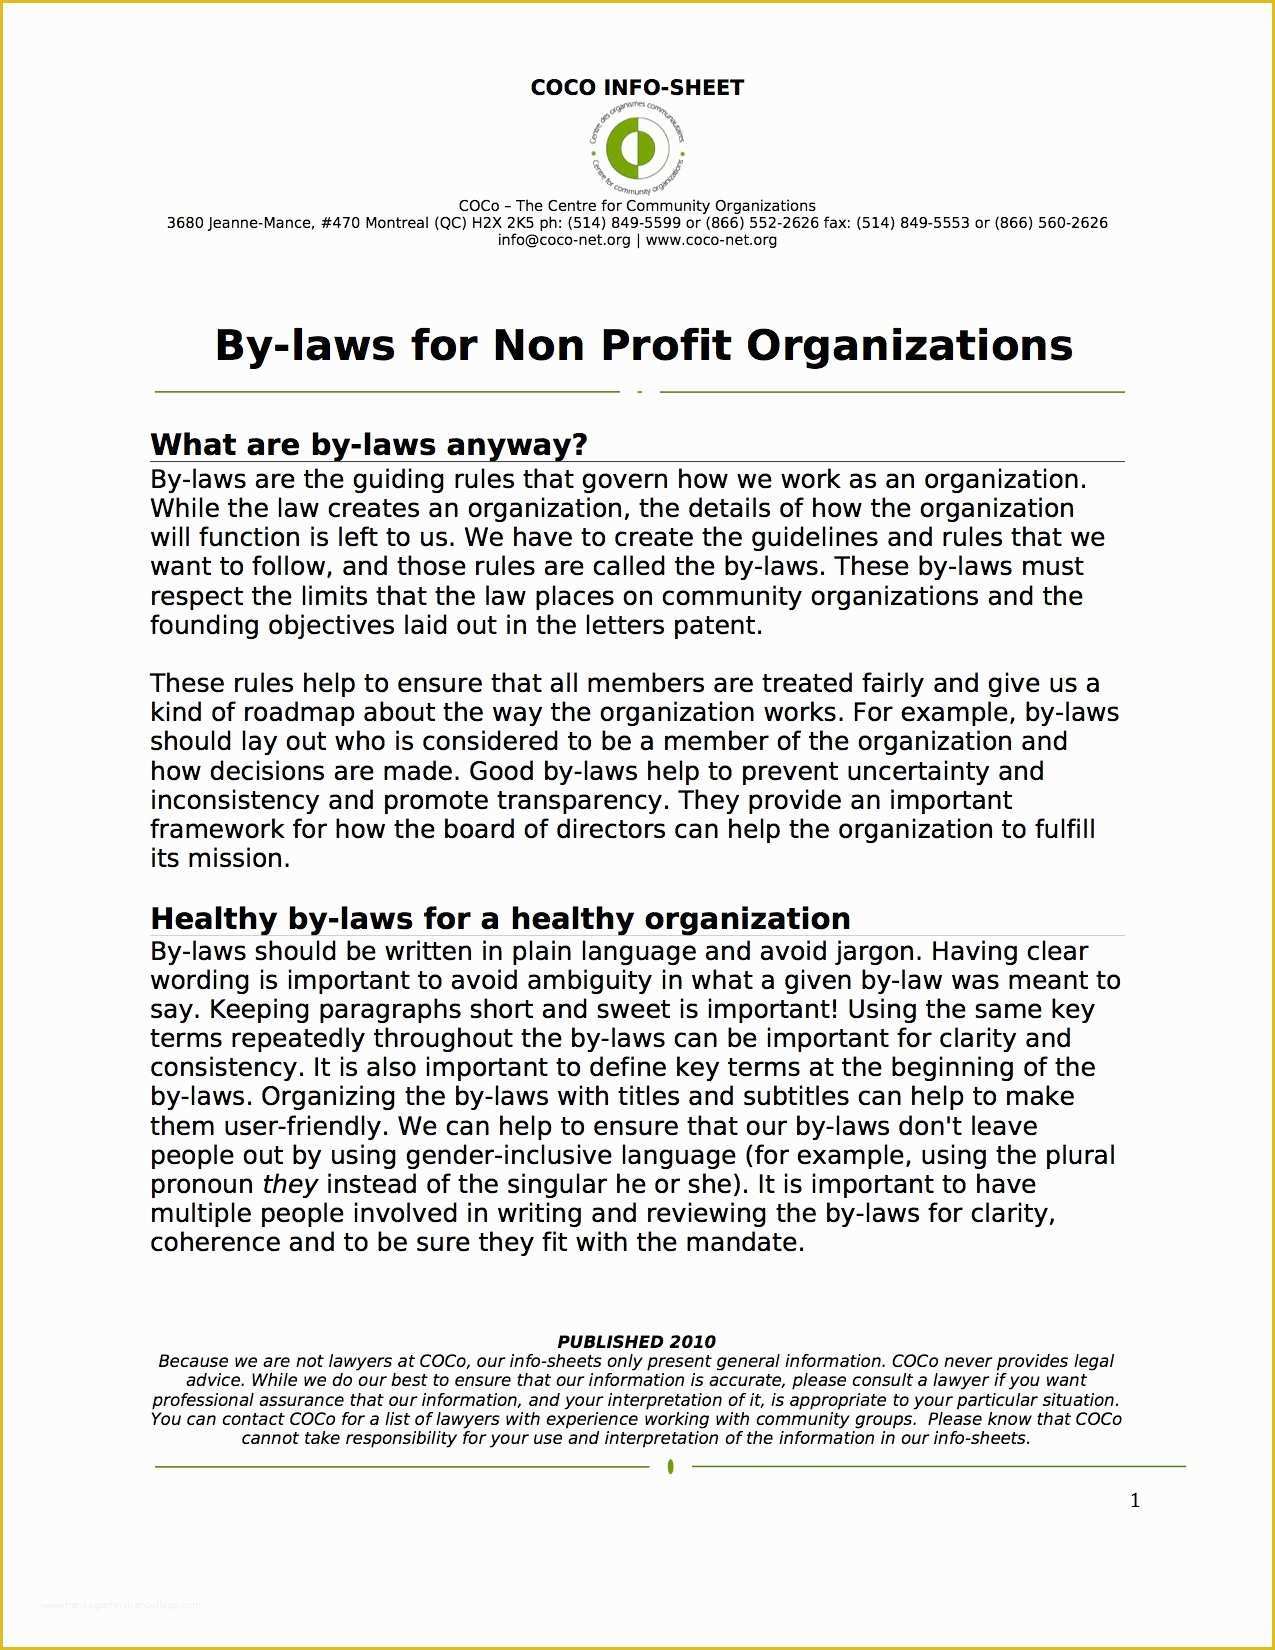 Free bylaws Template Of by Laws for Non Profit organizations Coco